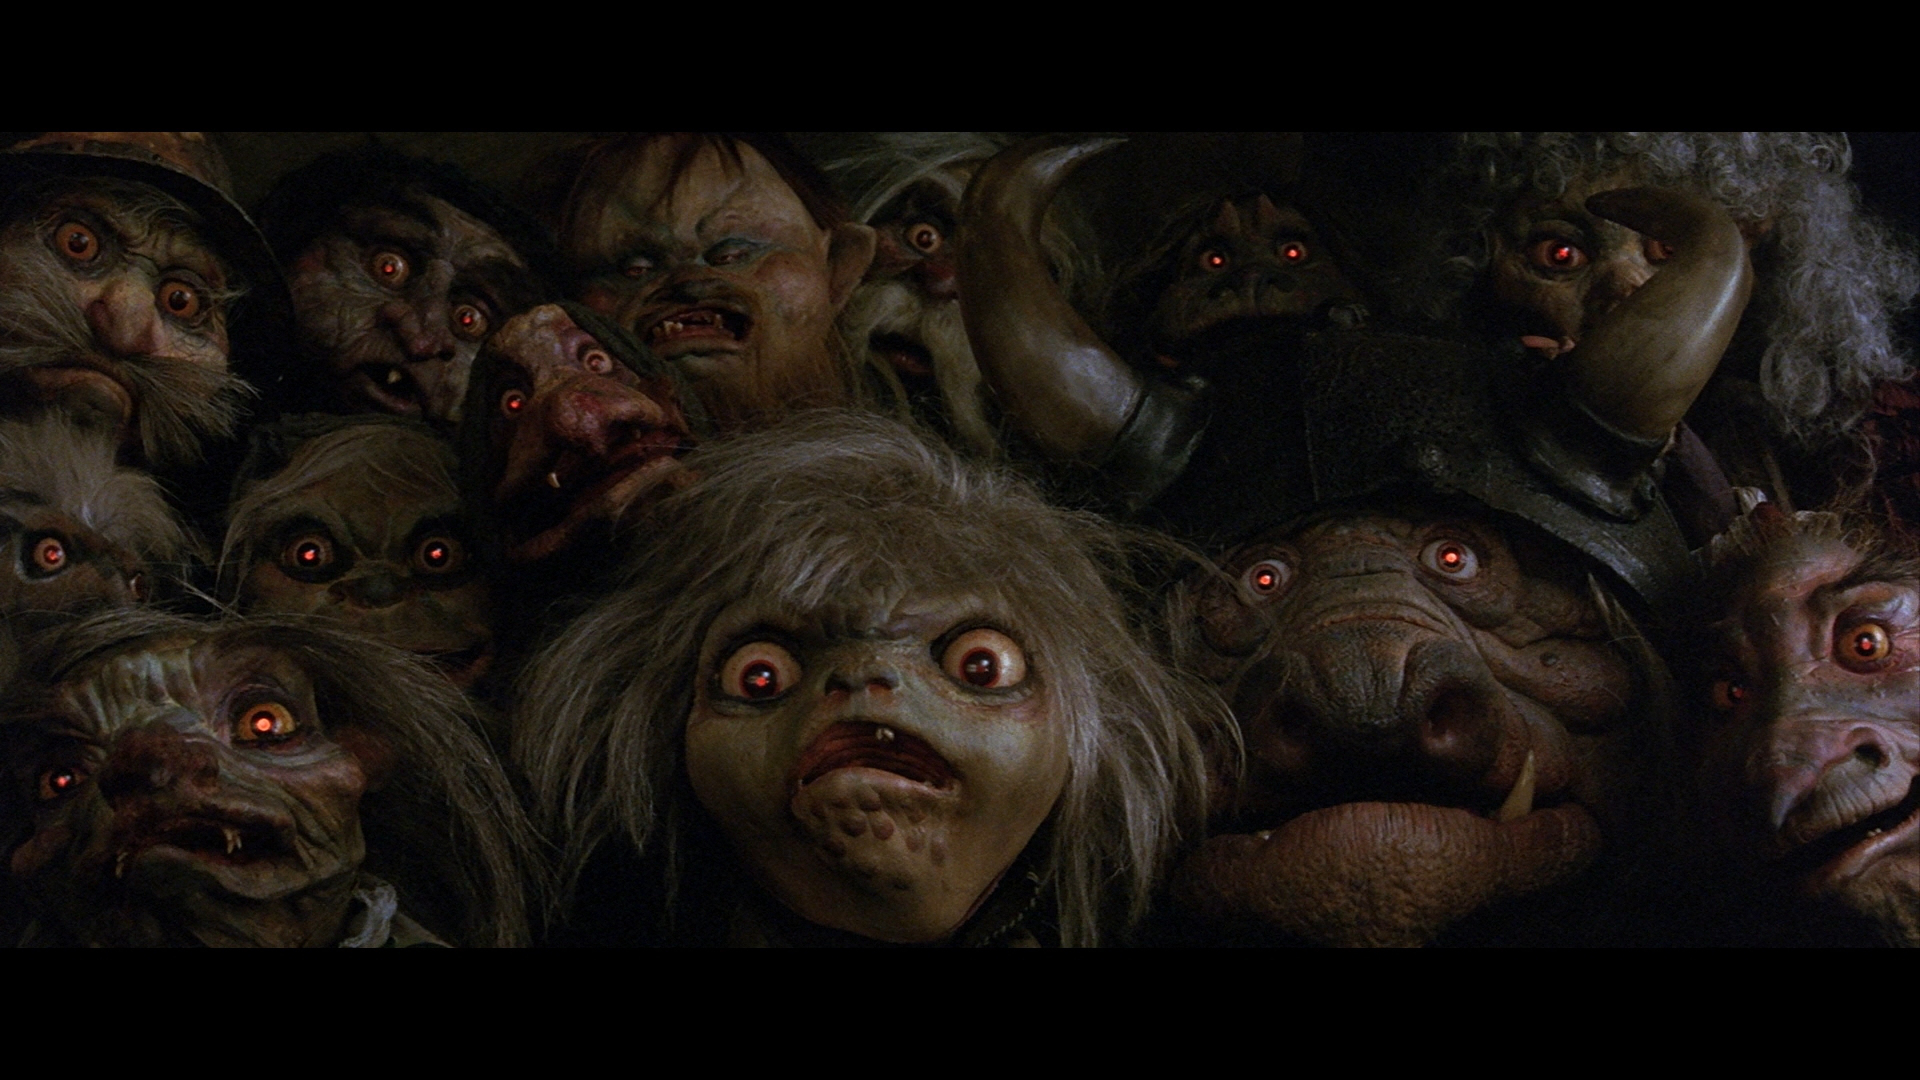 goblins-with-glowing-red-eyes-labyrinth-9029050-1920-1080